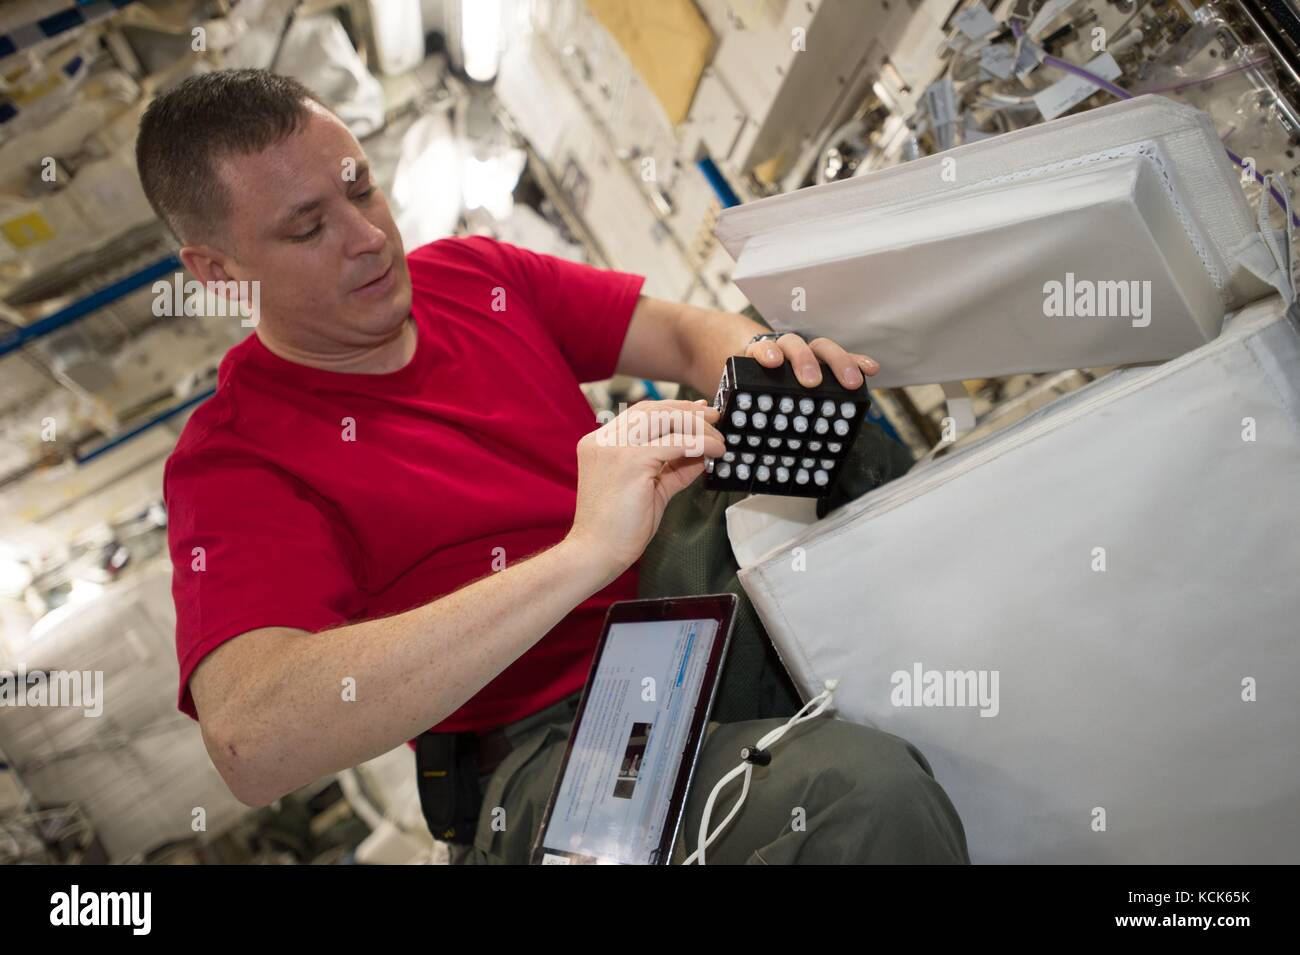 NASA International Space Station Expedition 51 prime crew member American astronaut Jack Fischer works on the Design of Accelerated Reactivators experiment in the Japanese Experiment Module June 6, 2017 in Earth orbit.   (photo by NASA Photo  via Planetpix) Stock Photo